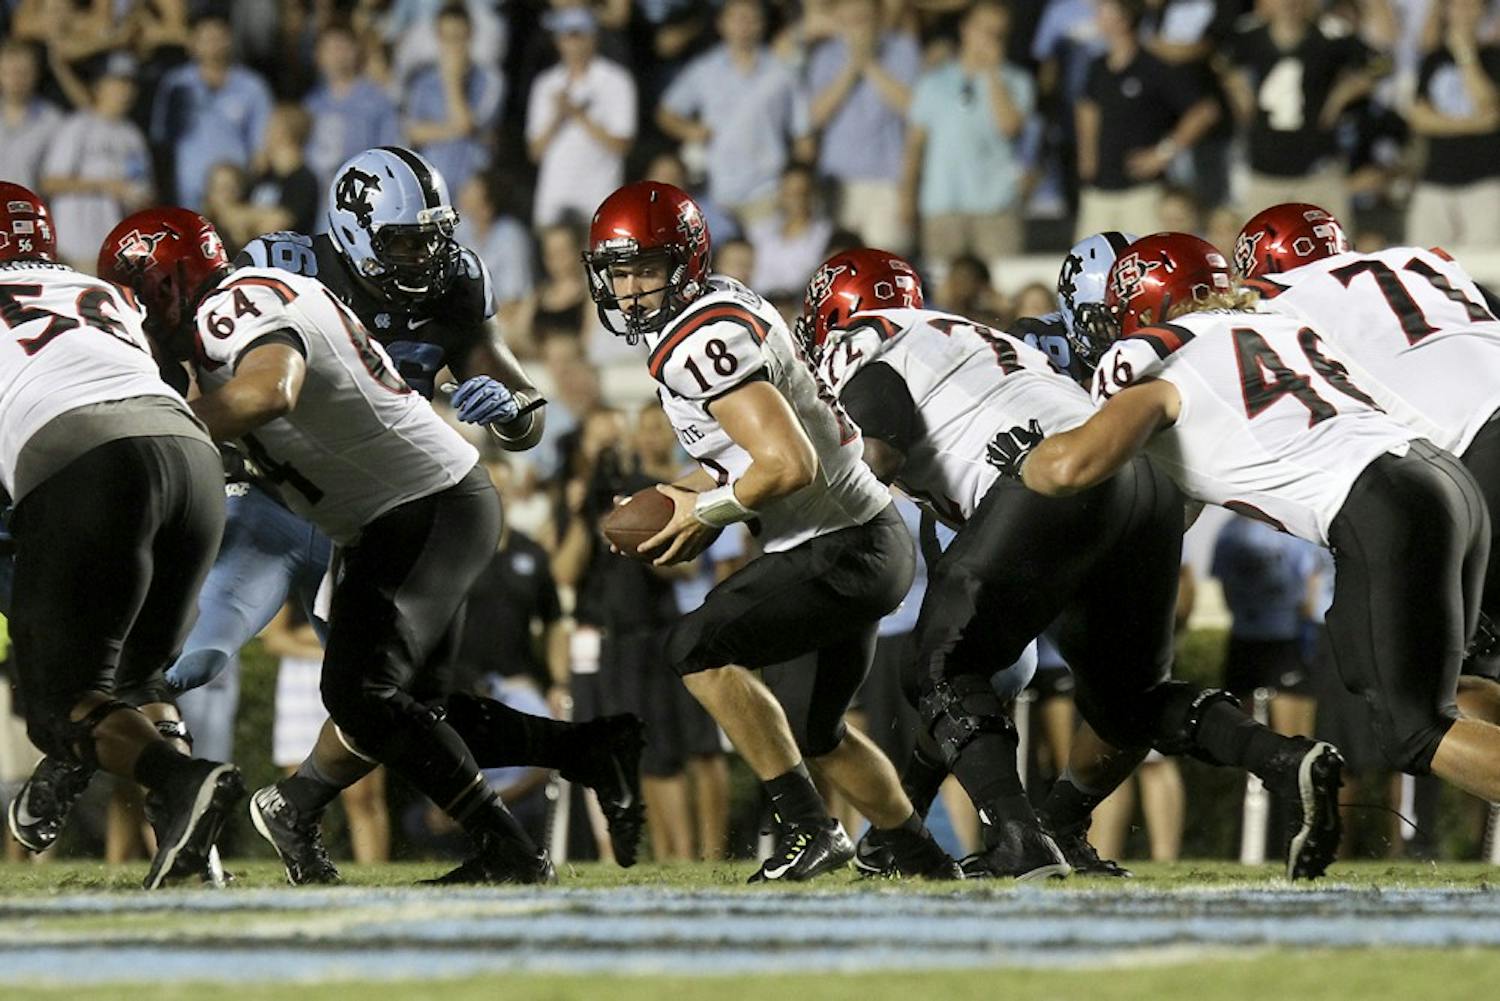 North Carolina defensive tackle Ethan Farmer (96) penterates a gap against San Diego State. Farmer is the only returning starter on the line from 2013.